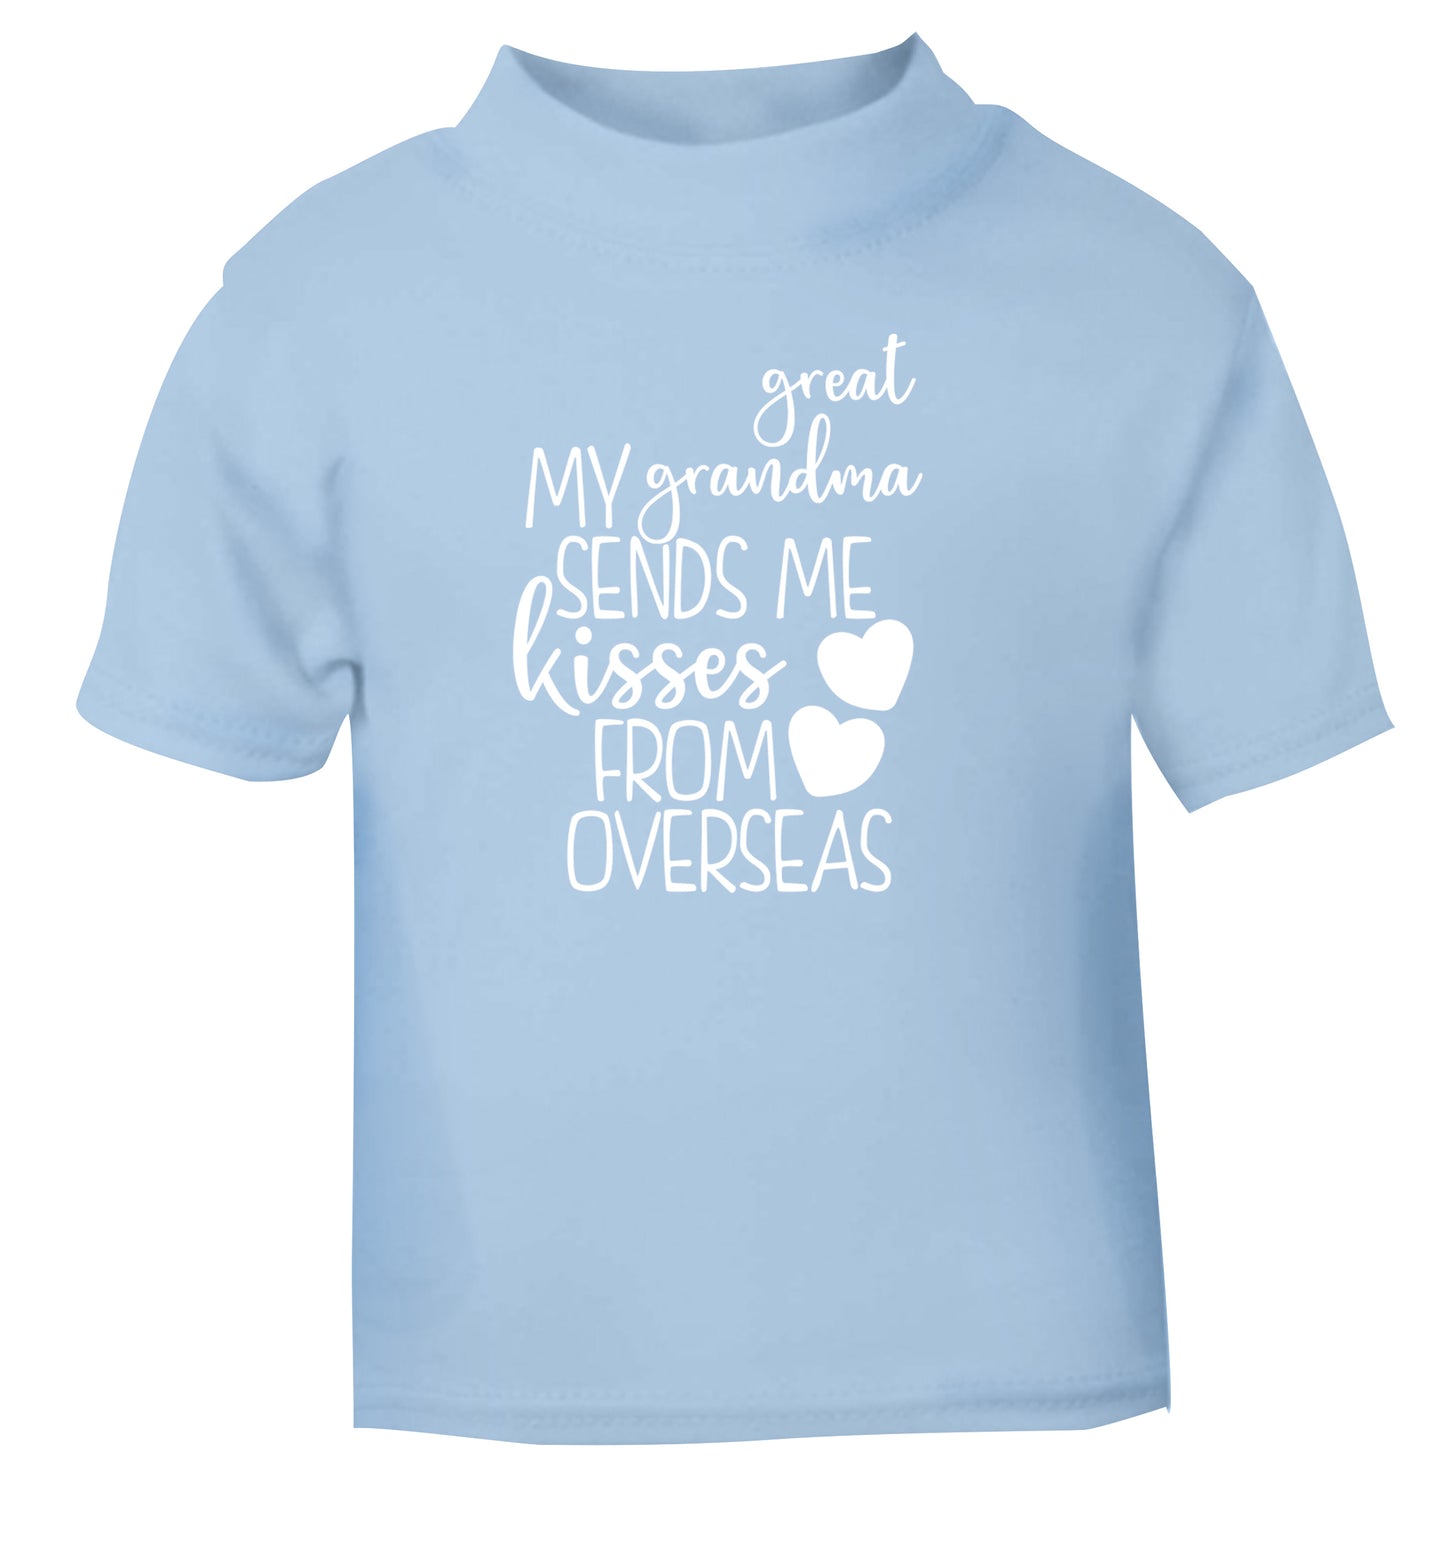 My great grandma sends me kisses from overseas light blue Baby Toddler Tshirt 2 Years